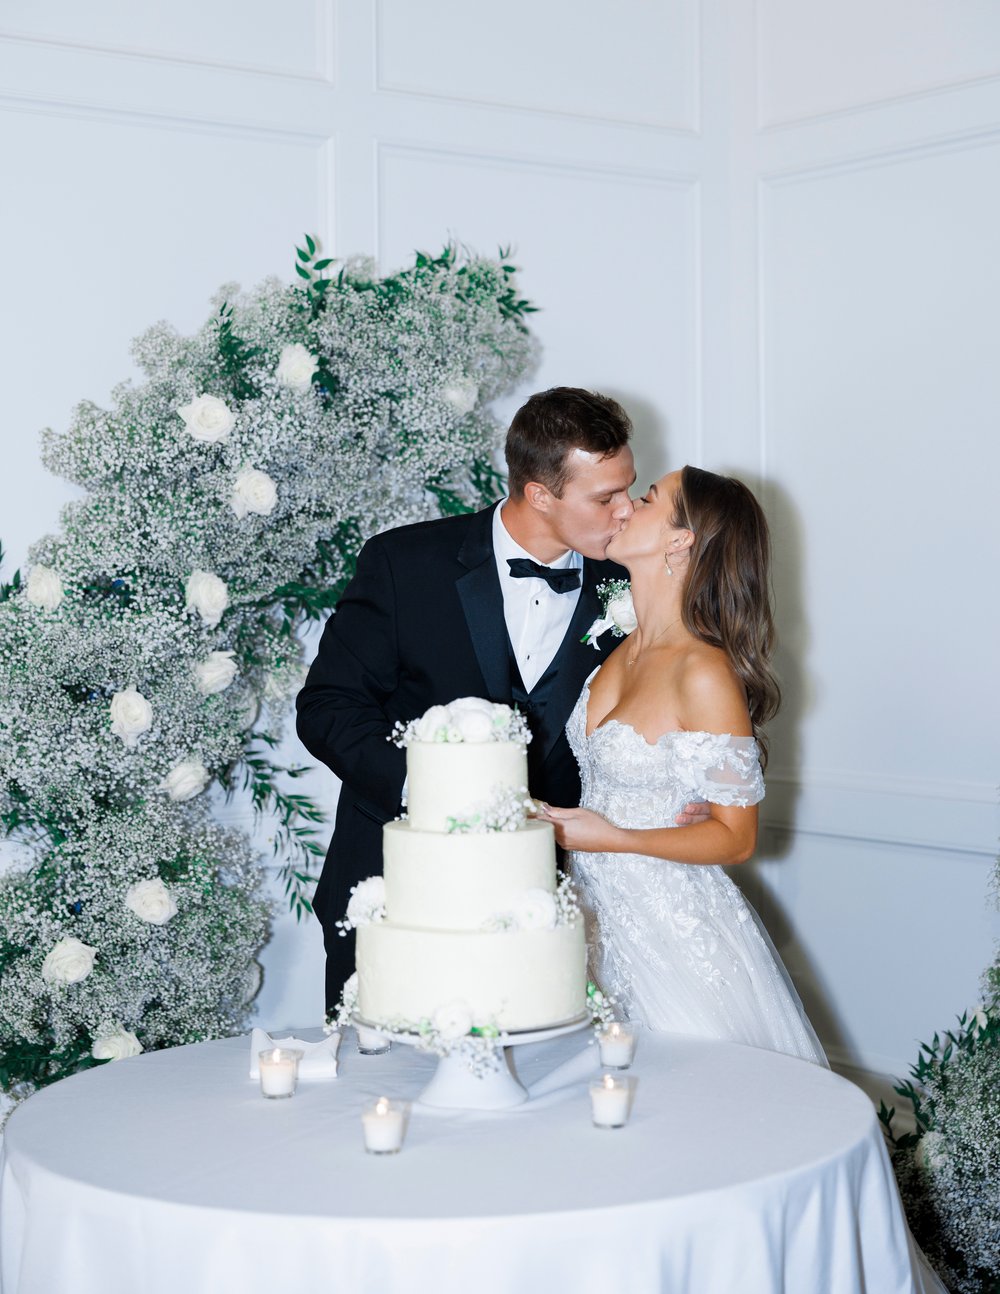  Indoor reception lighting tricks for photographers to capture the moments with Savanna Richardson Photography. flash photography #SavannaRichardsonPhotography #SavannaRichardsonTips #WeddingTips #PhotographyTips #weddingrecepiton #flashphotography 